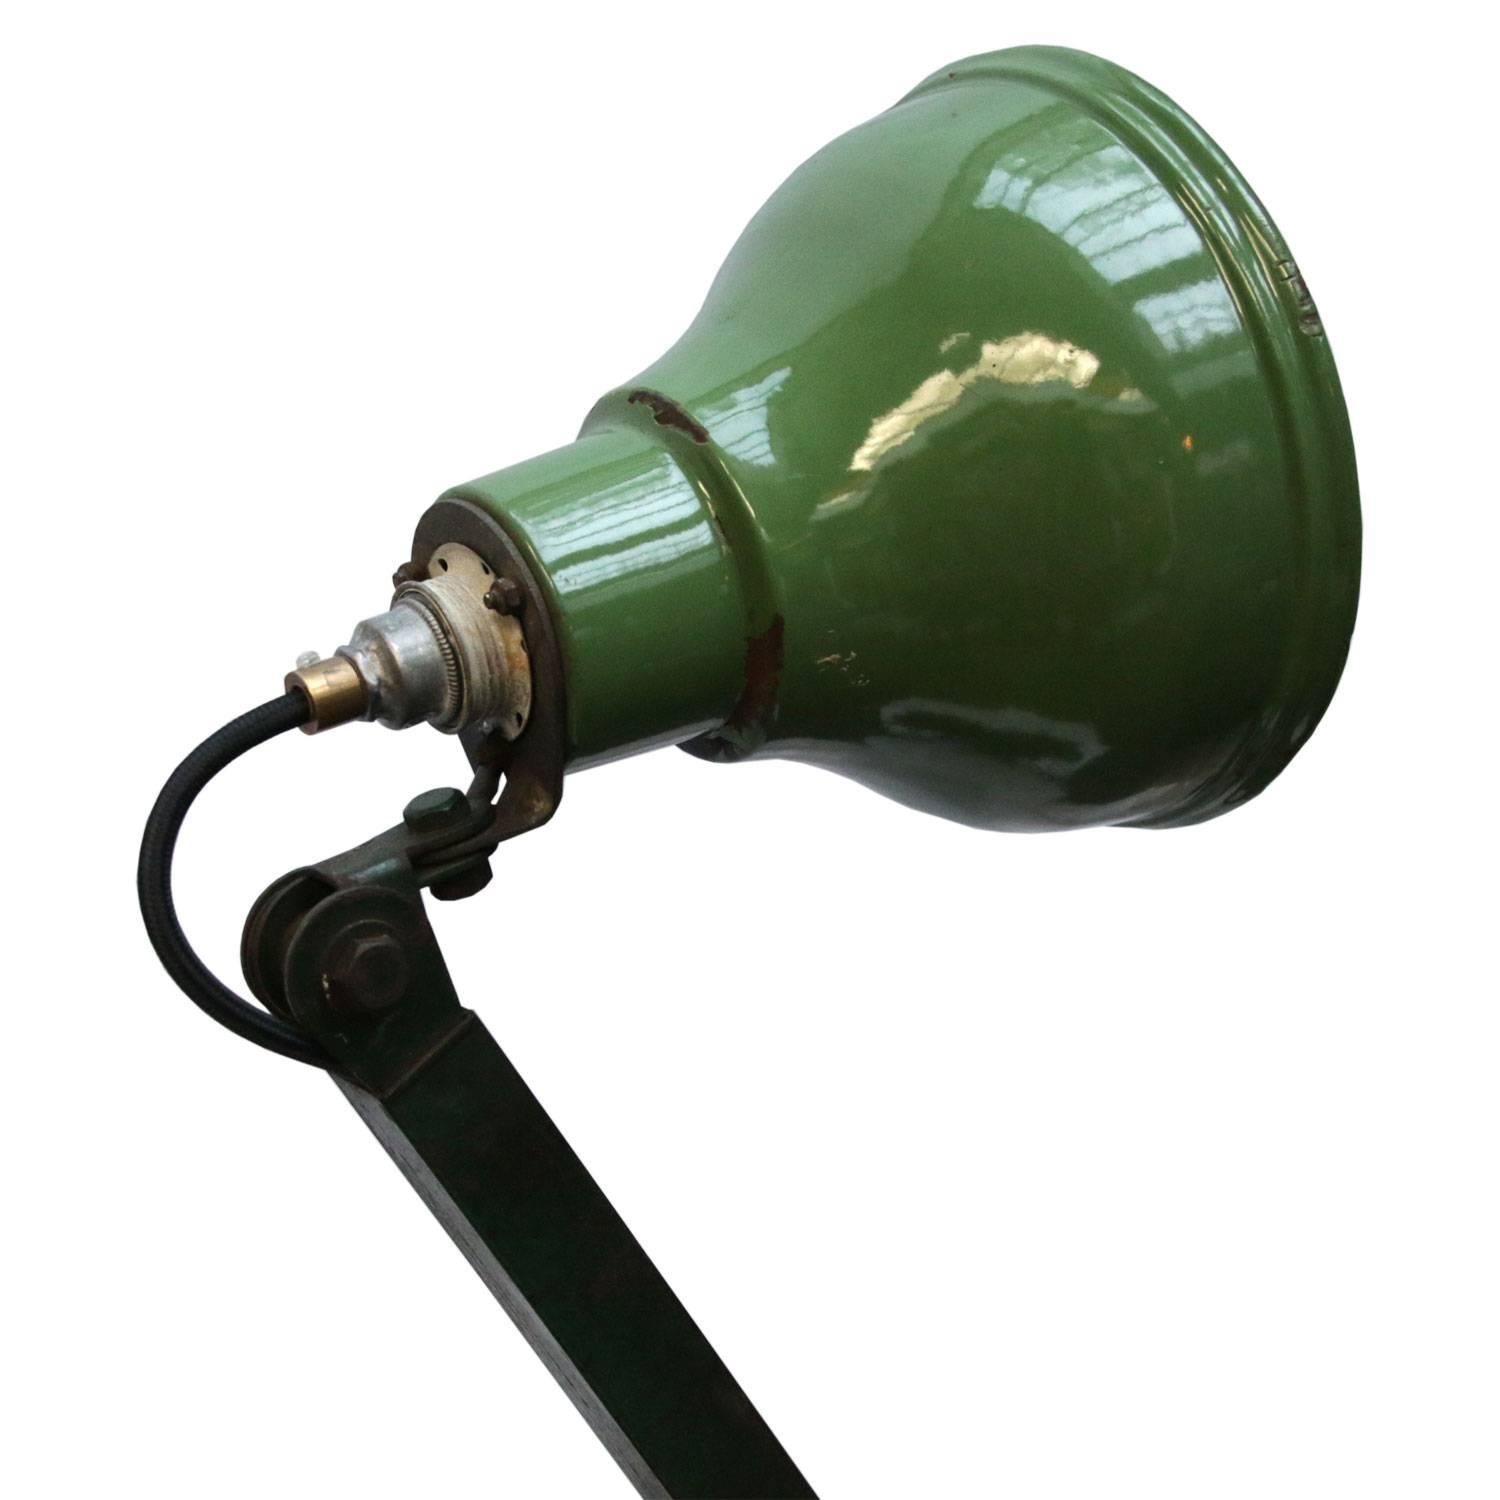 A rare machinist lamp by R.E.A.L. Made in England, circa 1930s. Steel construction with green vitreous enamel shade with white interior. British vintage machinist lamp, machinist table or desk or work light. By R.E.A.L. UK. Green enamel shade.